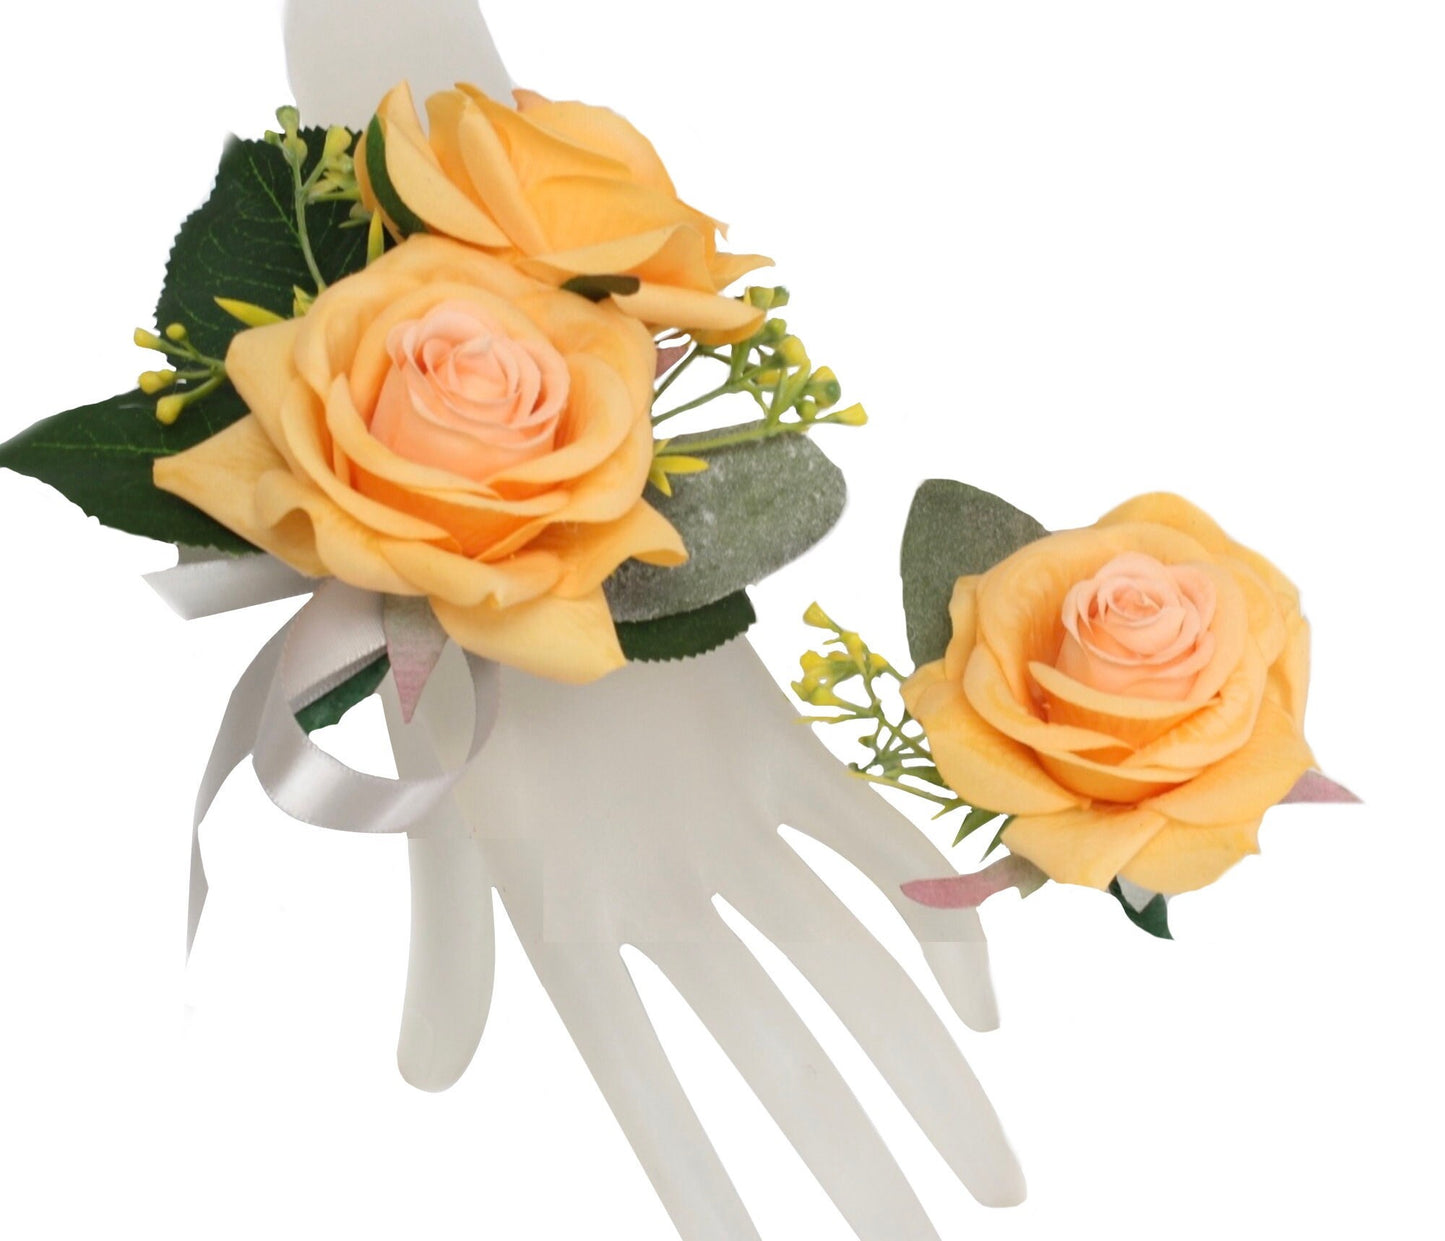 Luxurious Life-Like Rose Corsage & Boutonniere Set – Choose Your Color